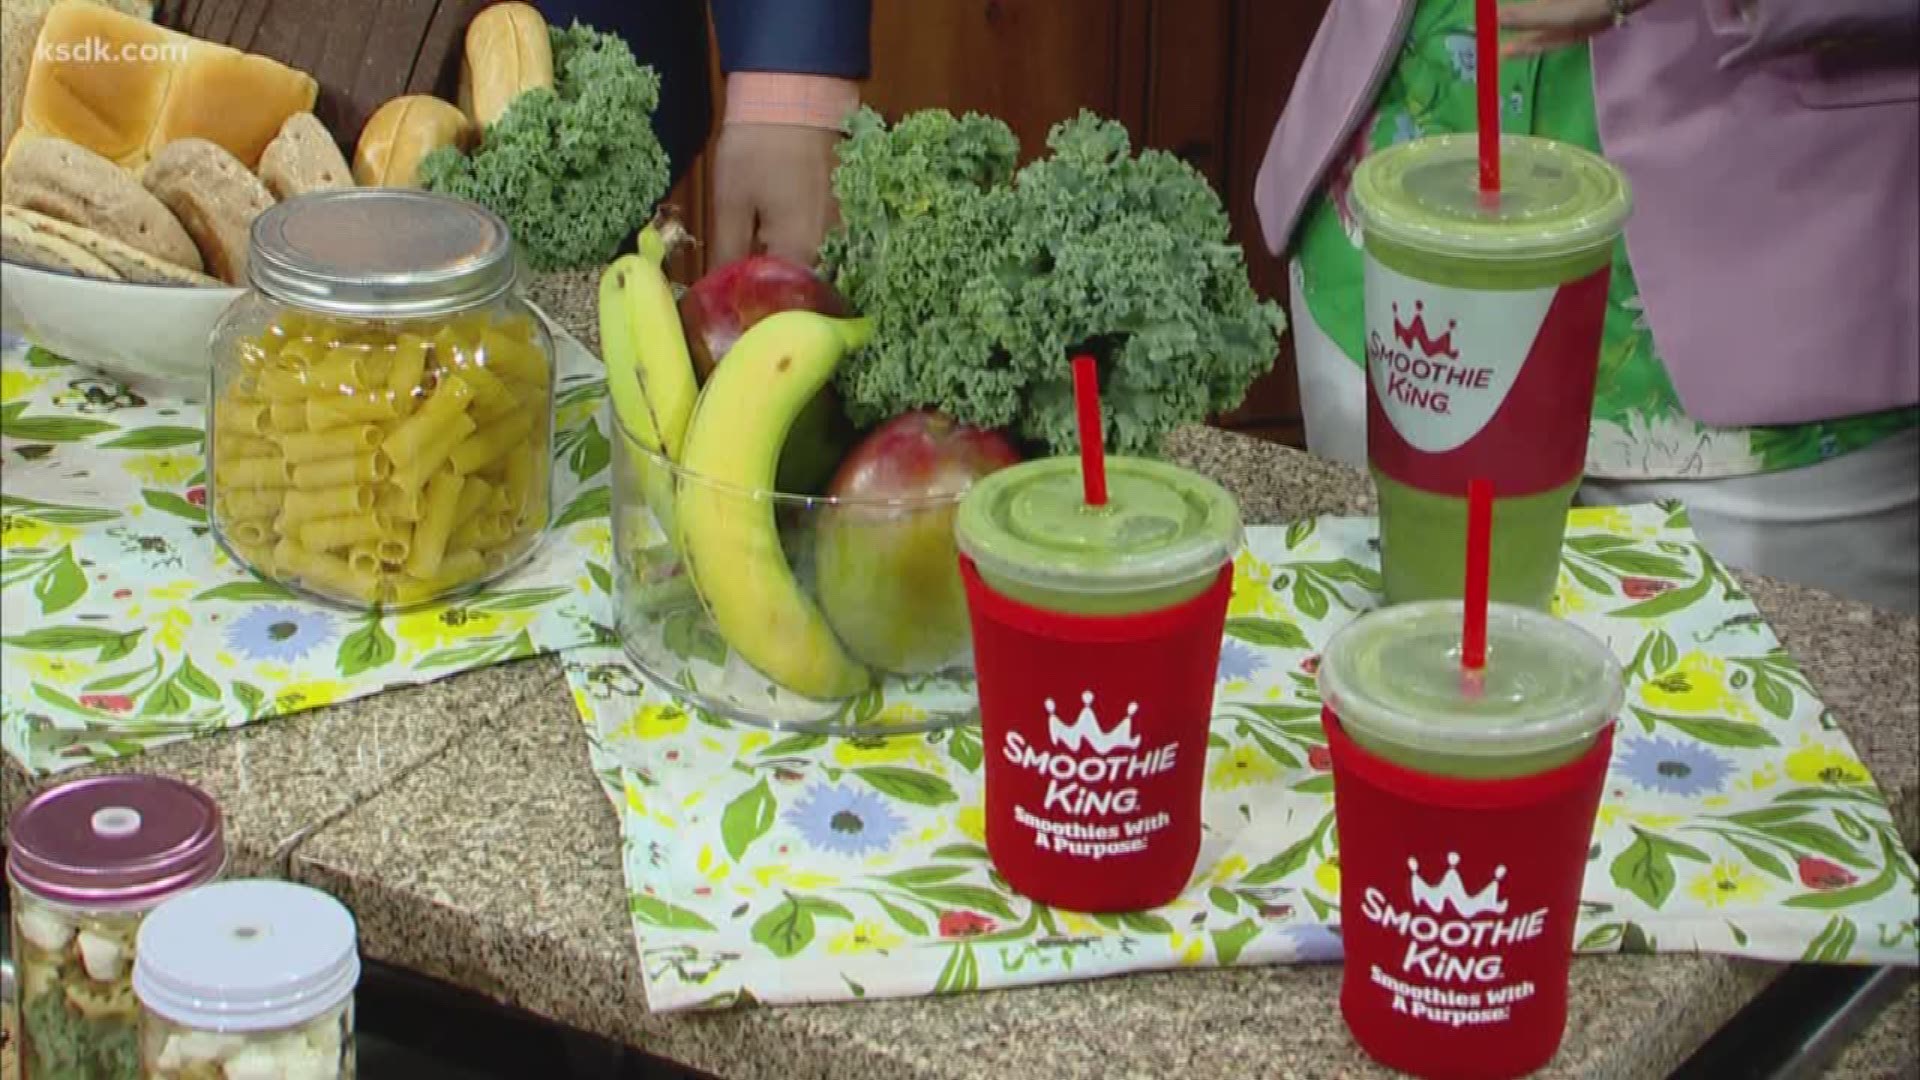 The new Slim-N-Trim Veggie Smoothie from Smoothie King is a good option for your diet.